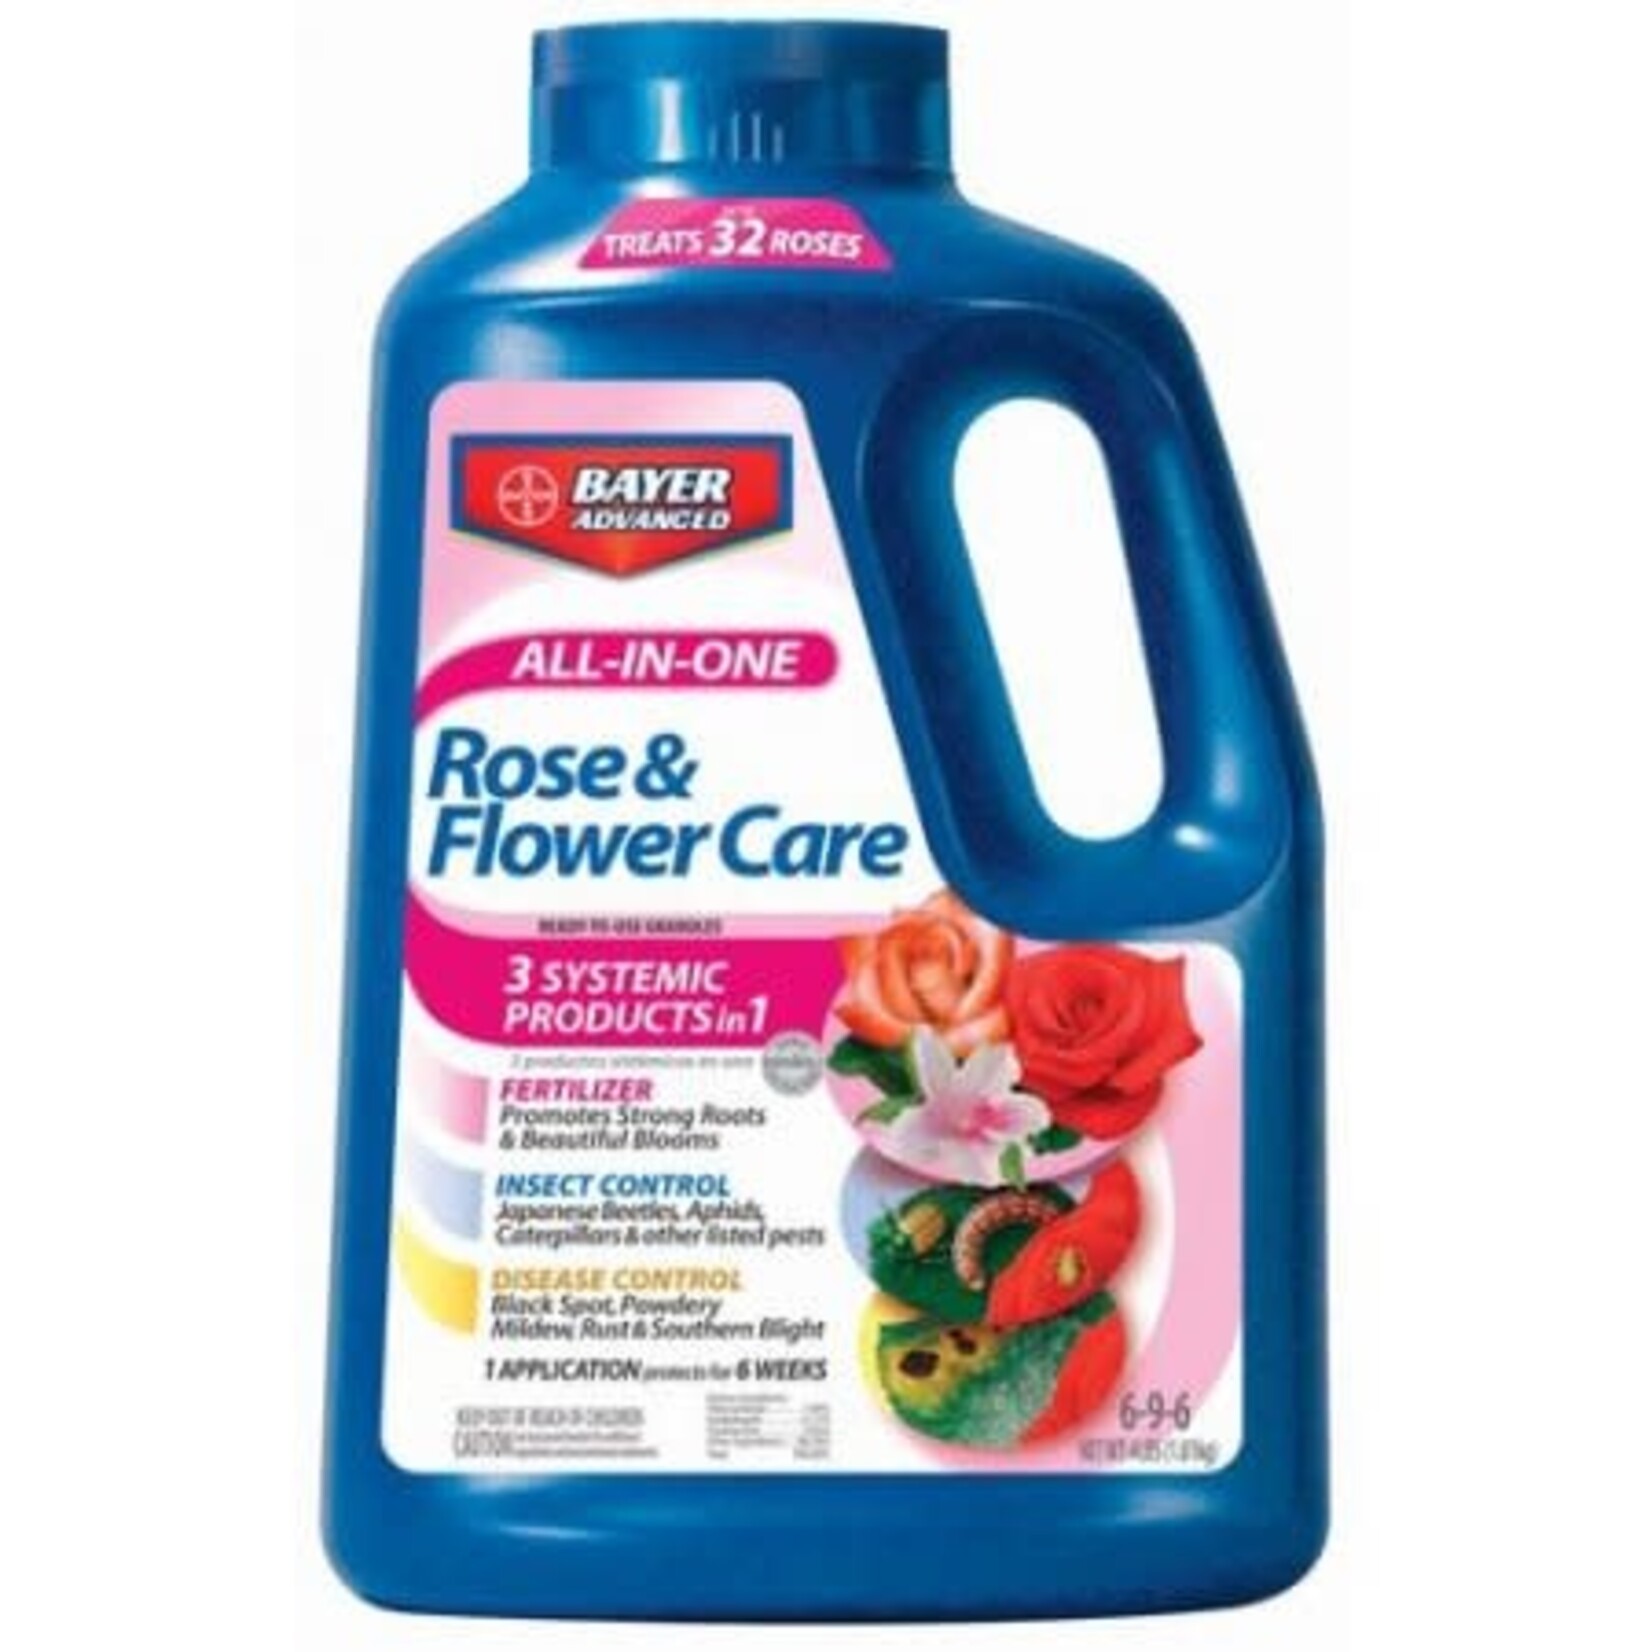 All In One Rose & Flower Care 32 oz.